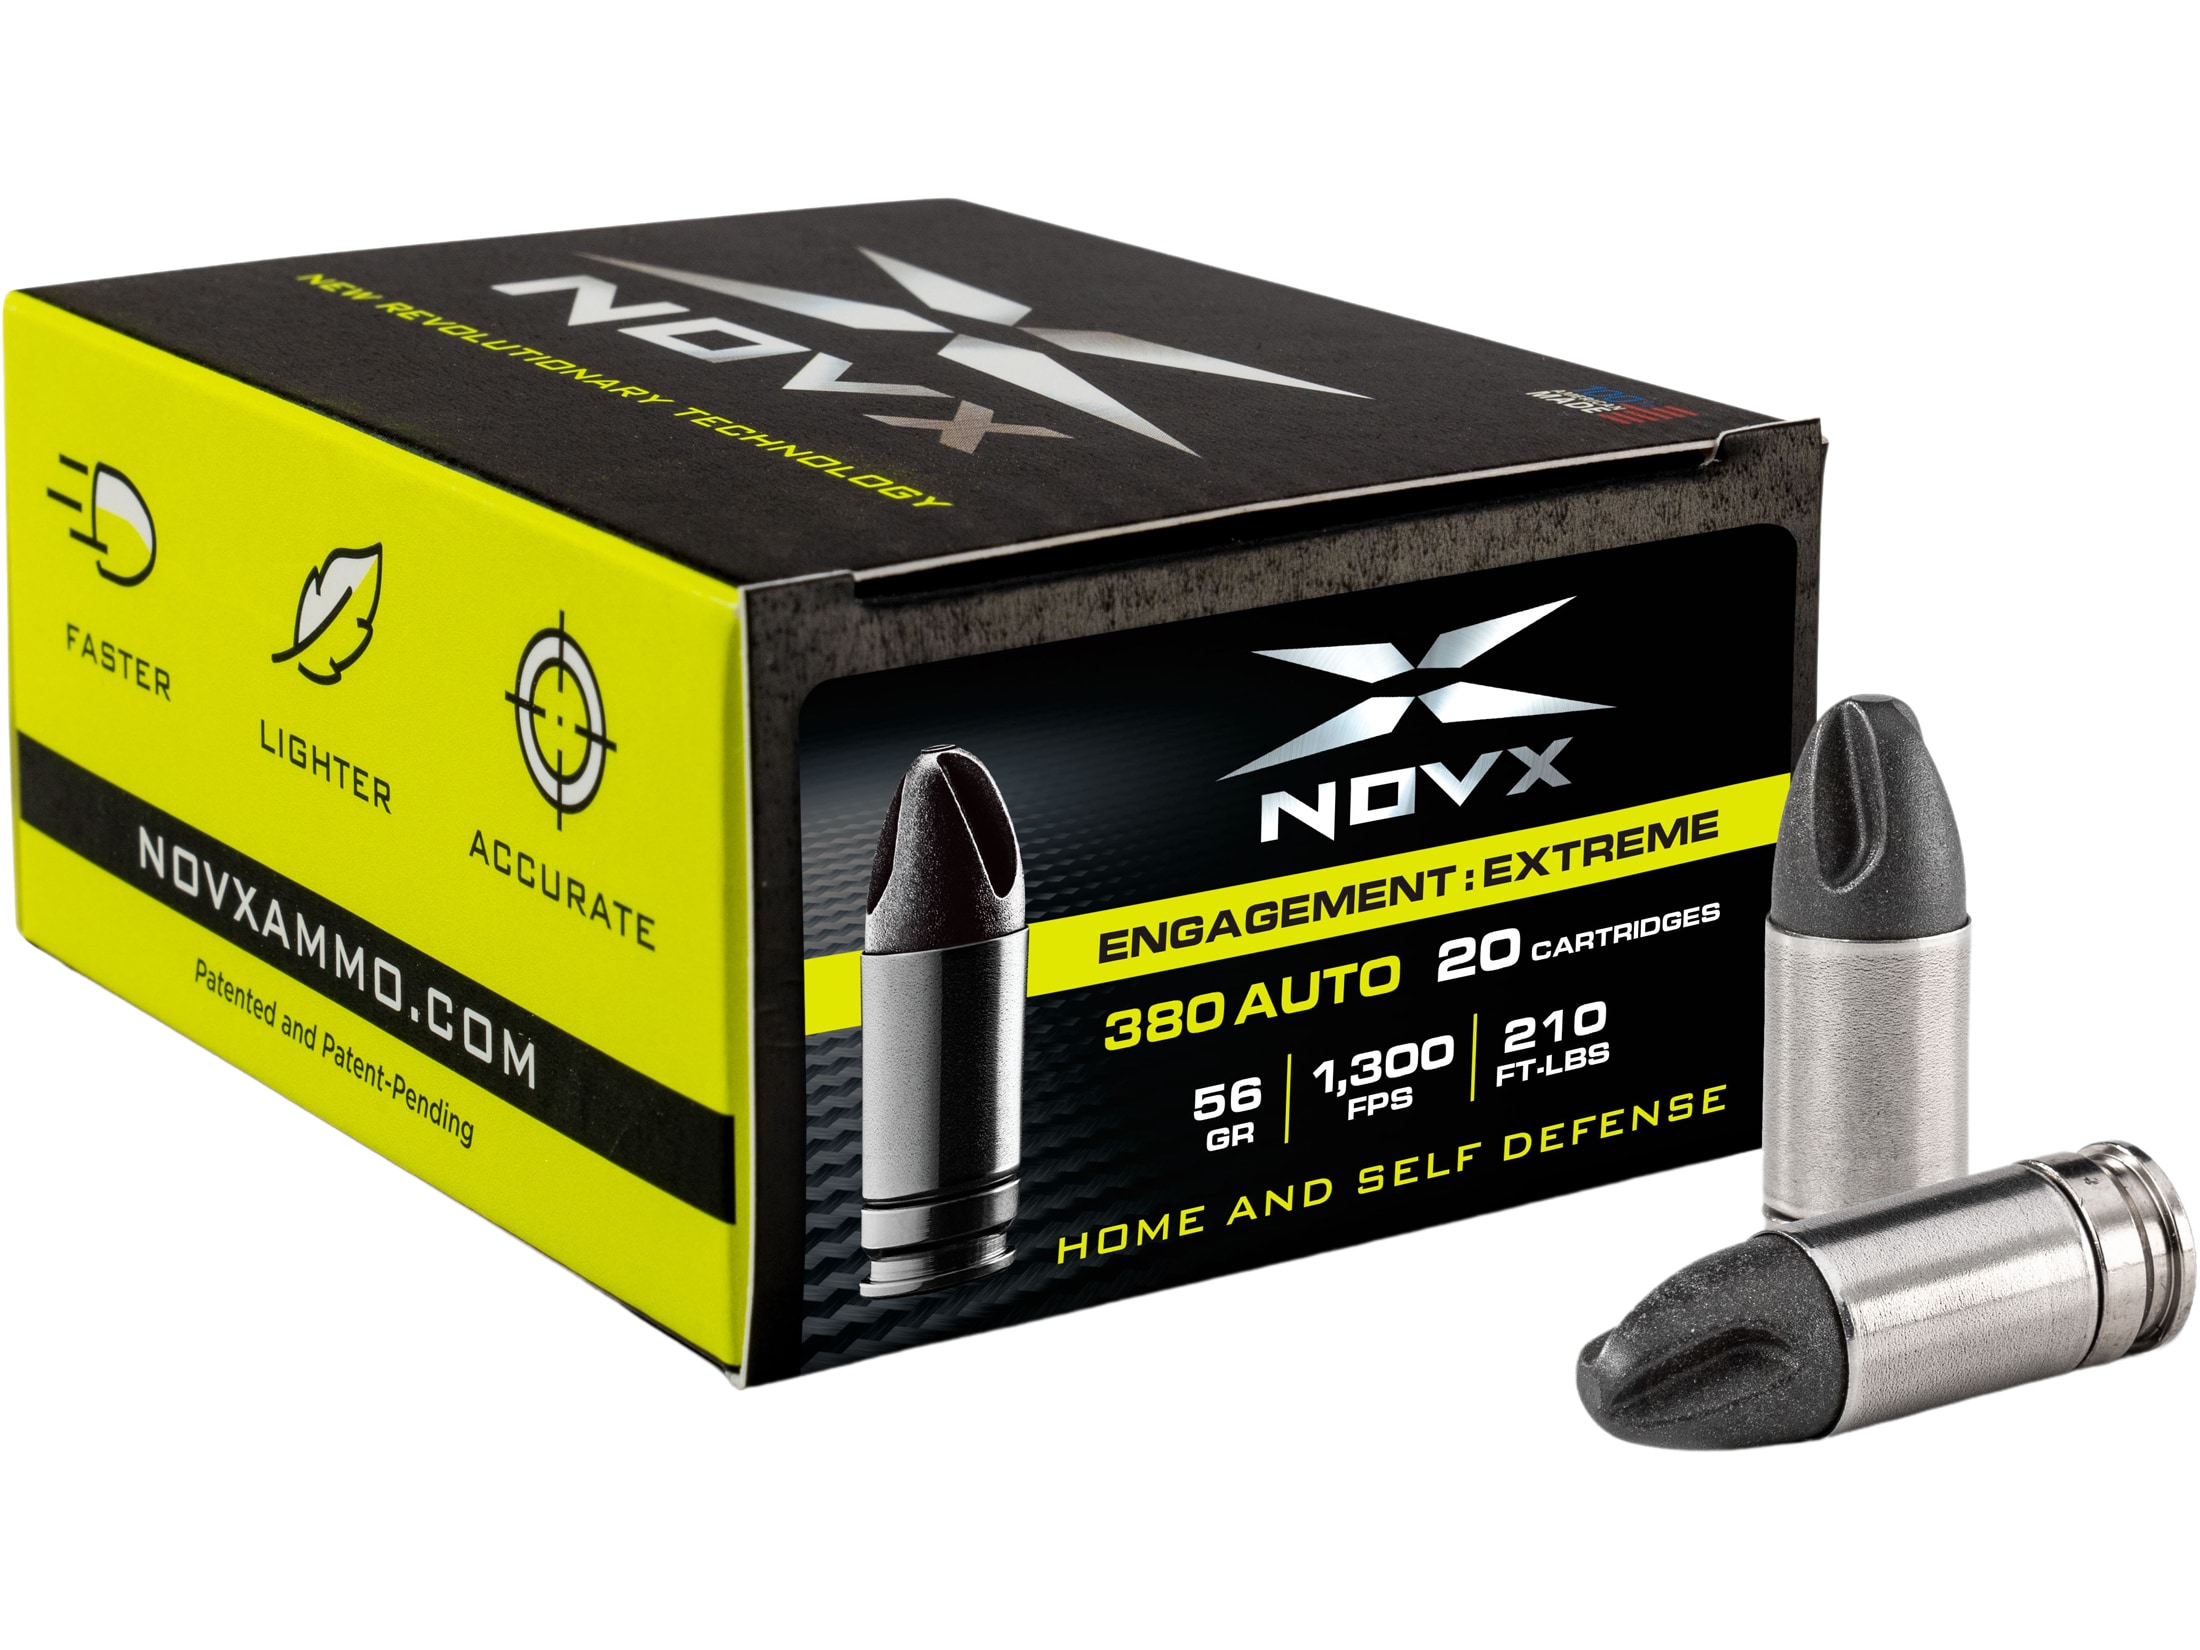 NovX Engagement Extreme Self-Defense 380 ACP Ammo 56 Grain Fluted Lead